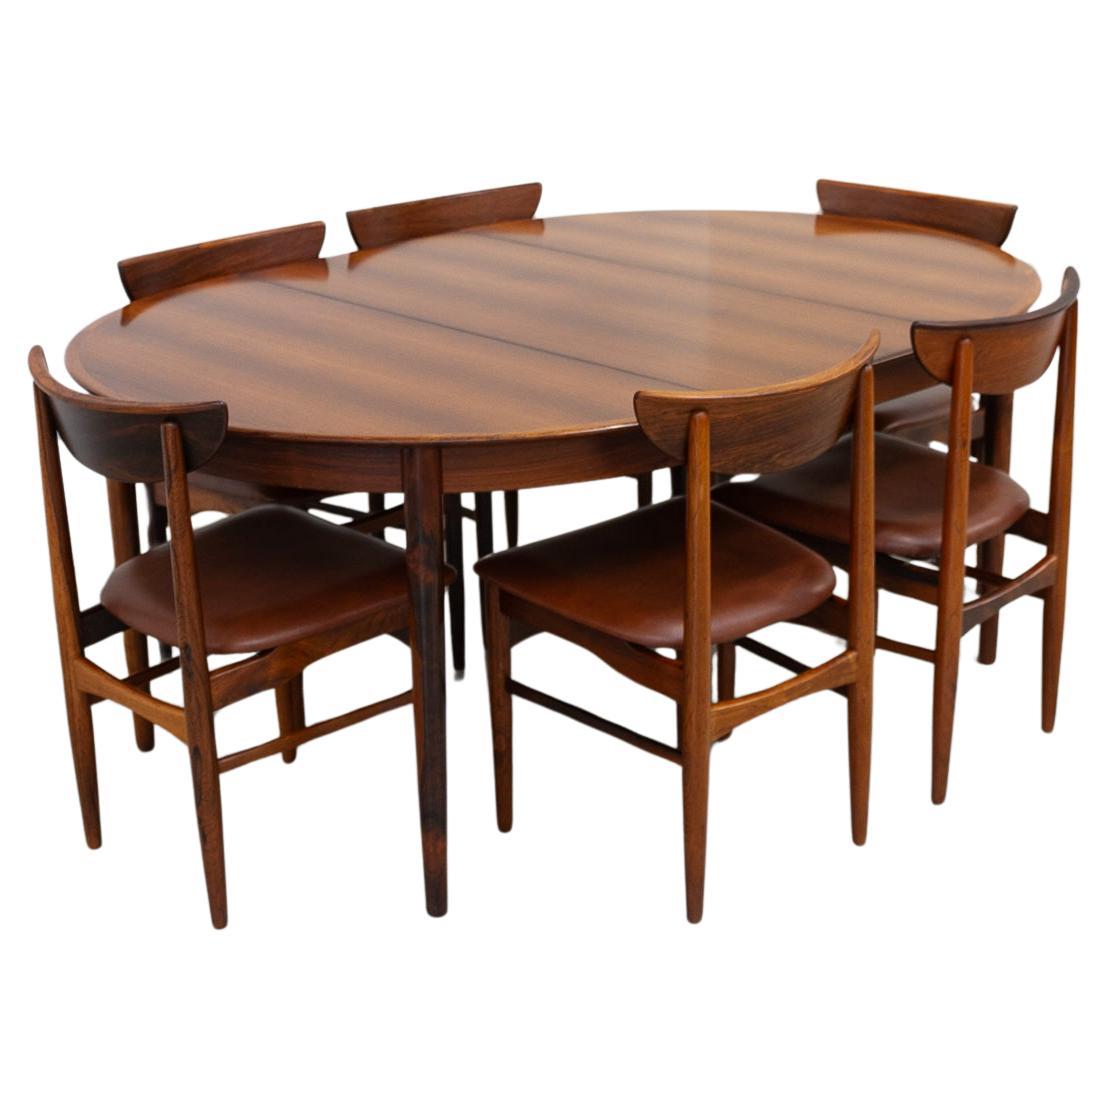 Danish Modern Rosewood Dining Room Set by Skovby, 1960s. For Sale